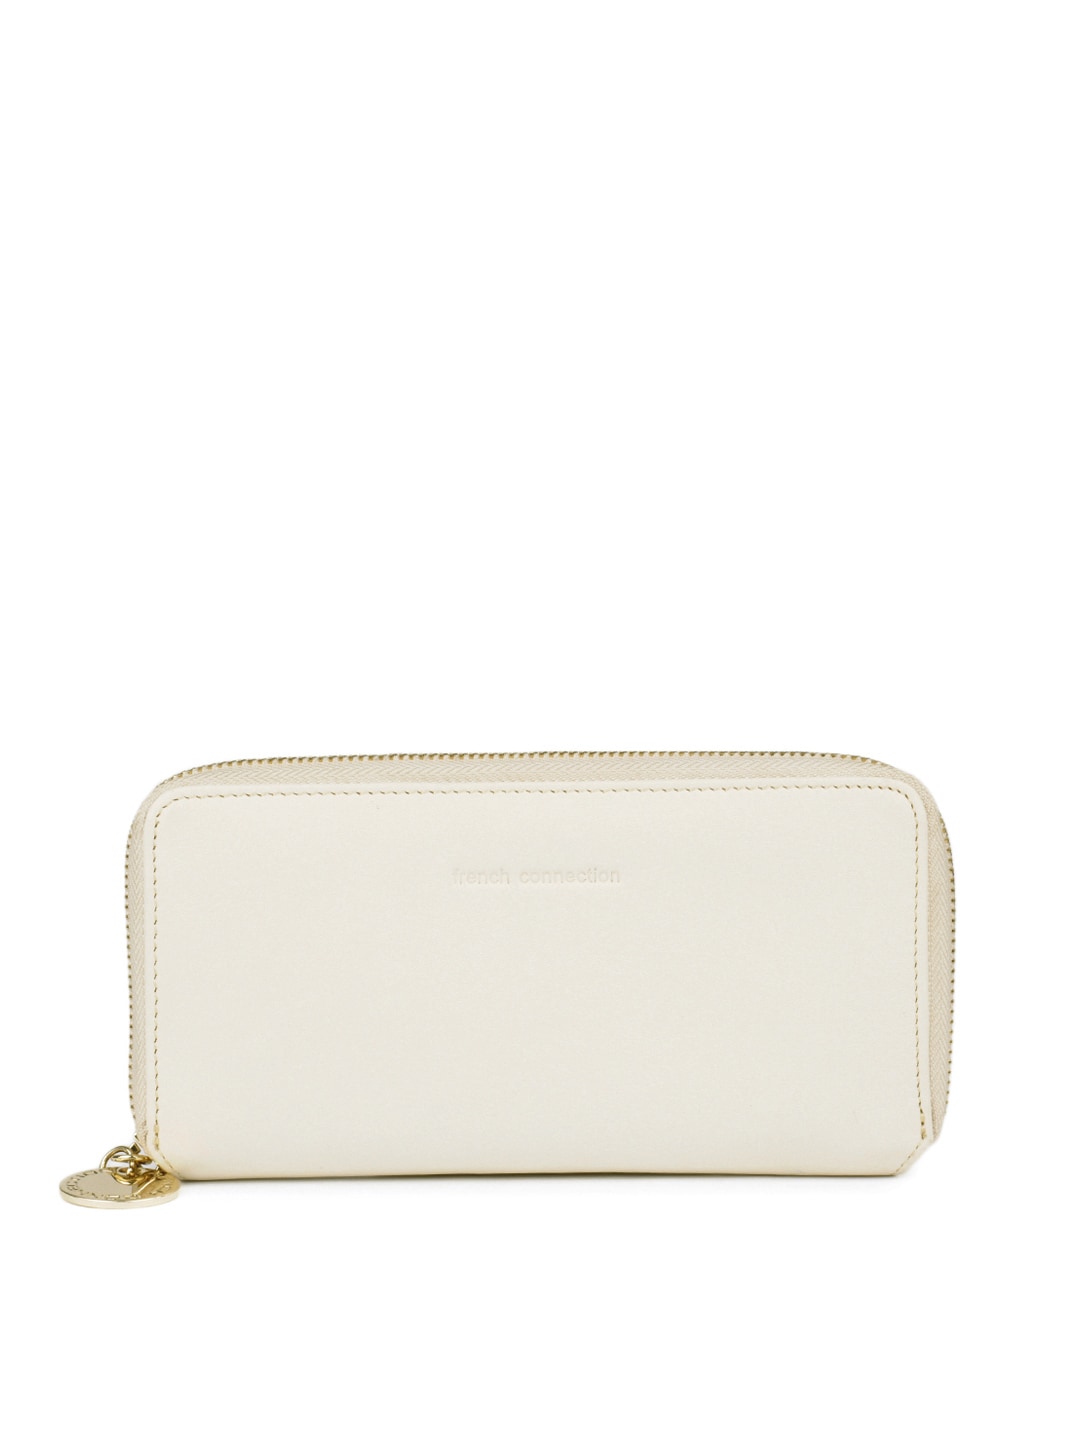 French Connection Women Cream Wallet